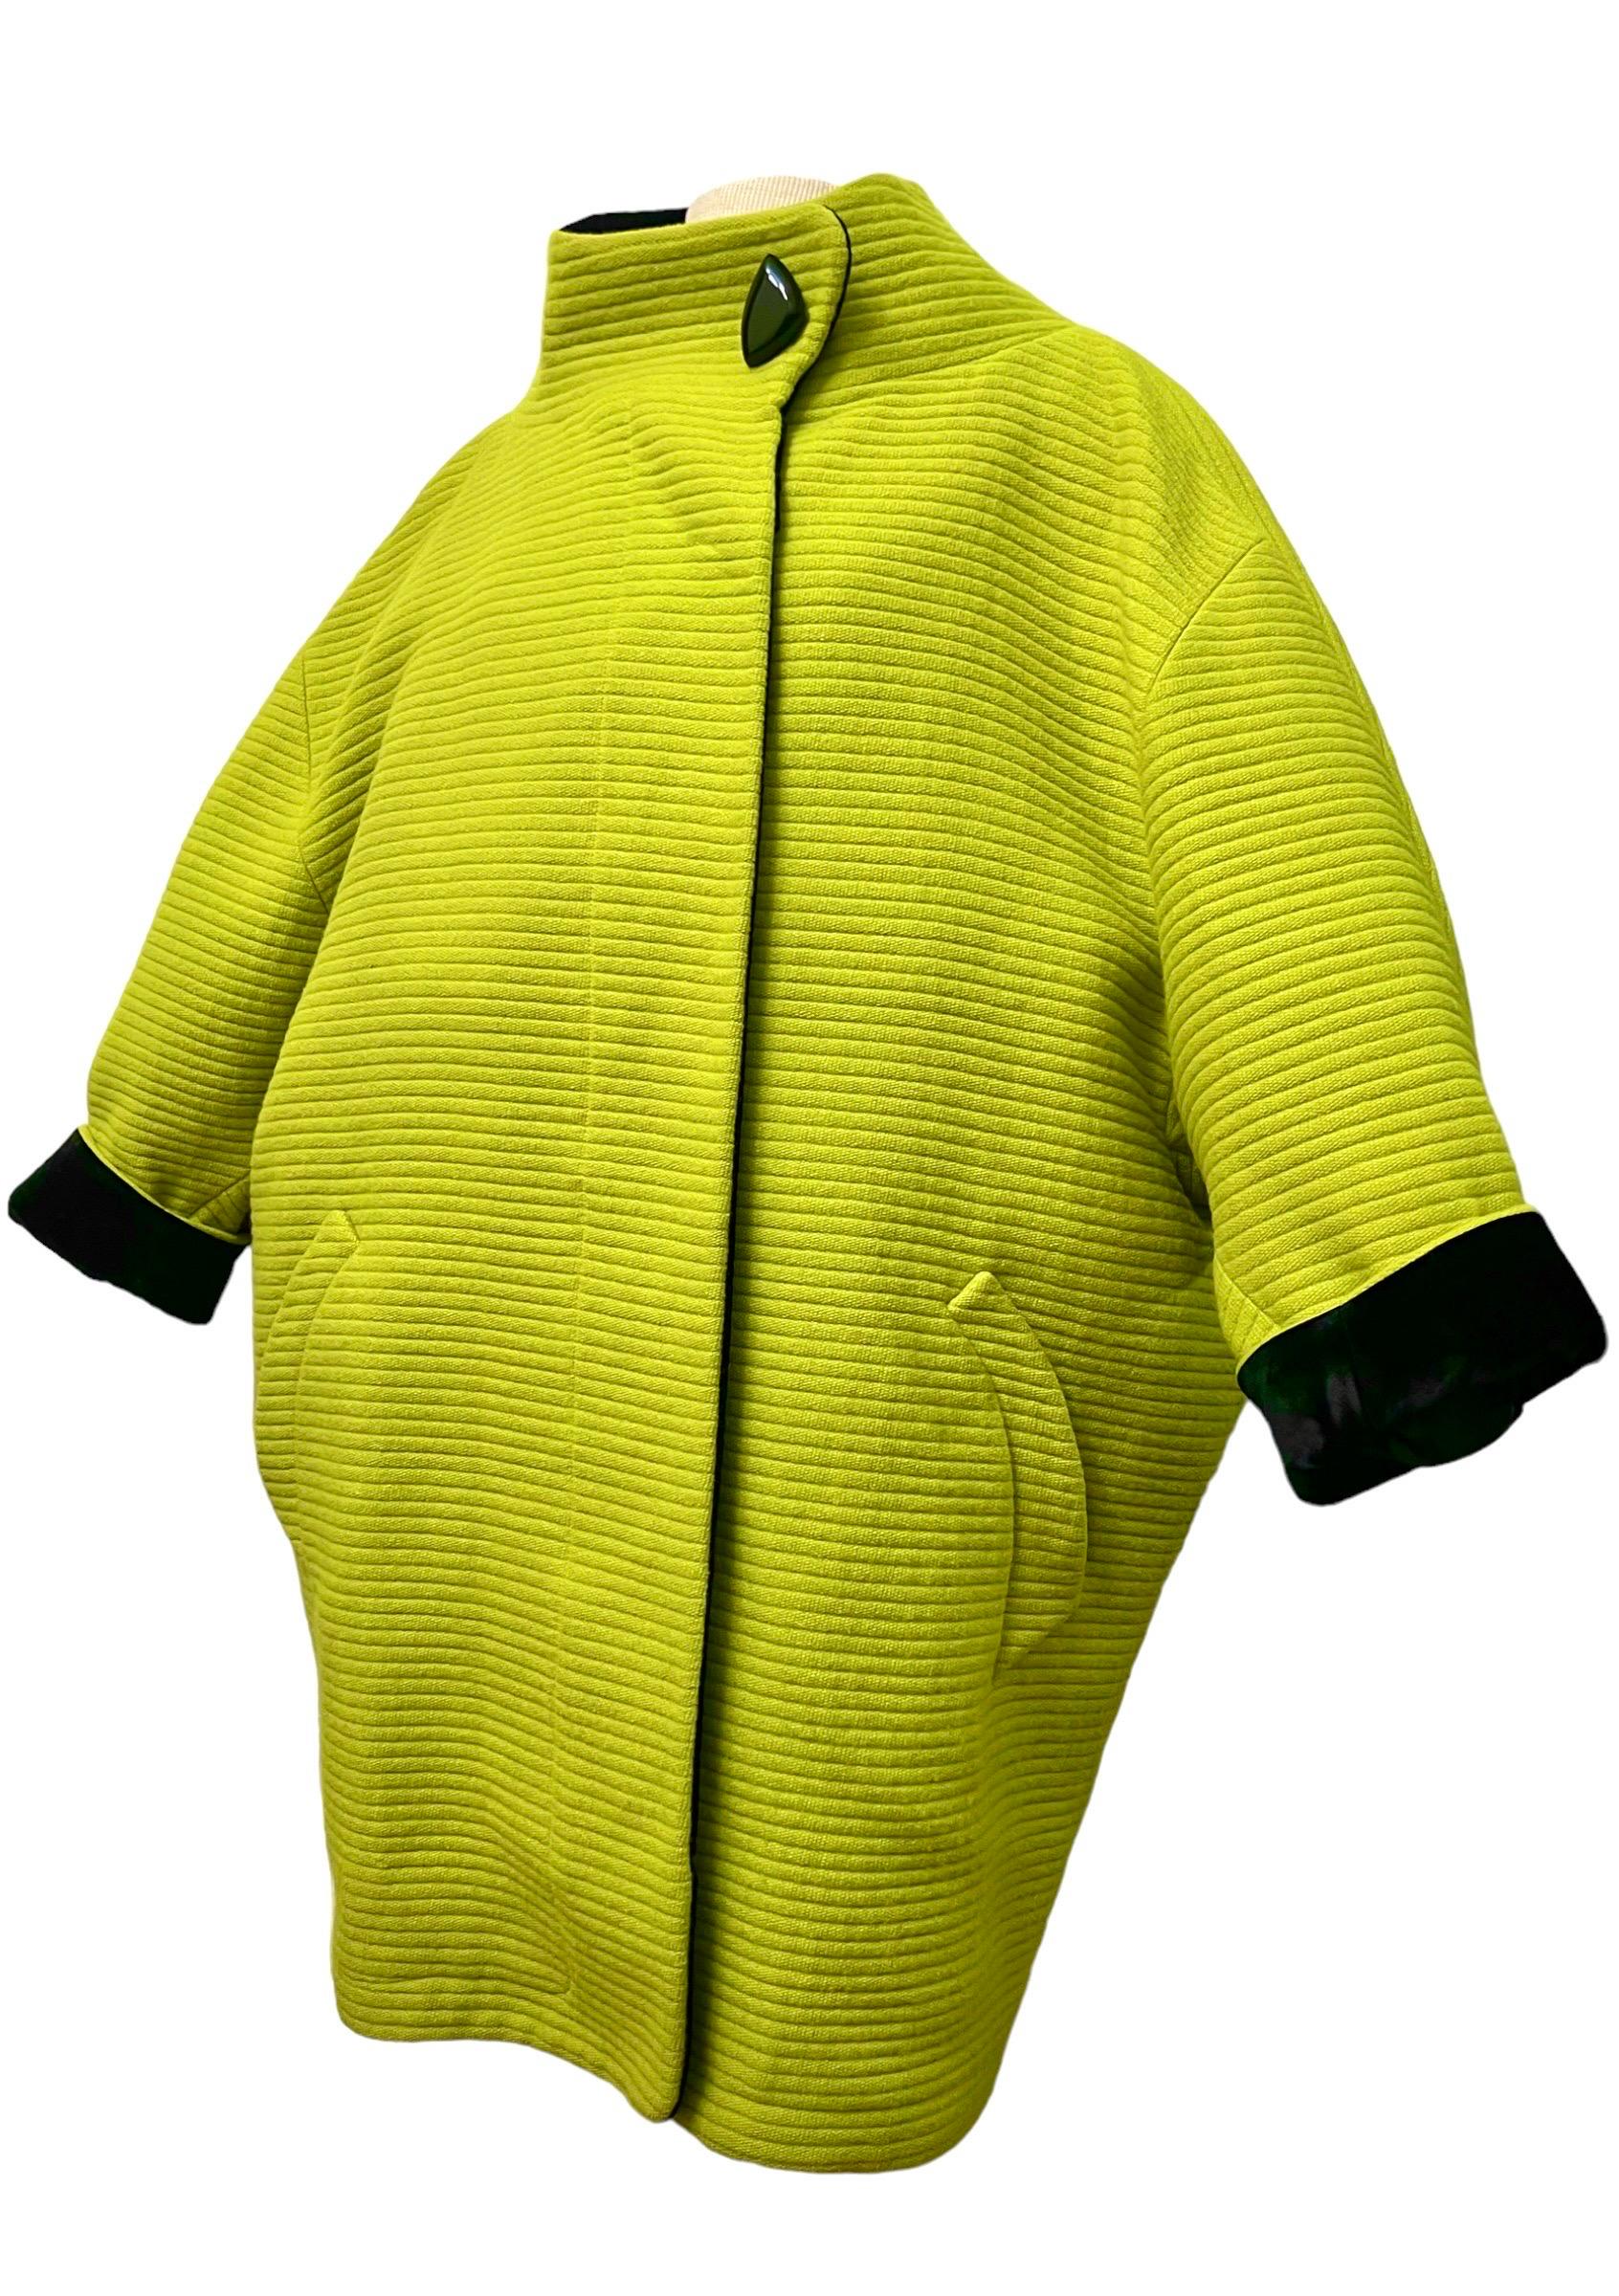 Women's F/W 1990 Thierry Mugler Lime Green Futuristic Cocoon Coat For Sale